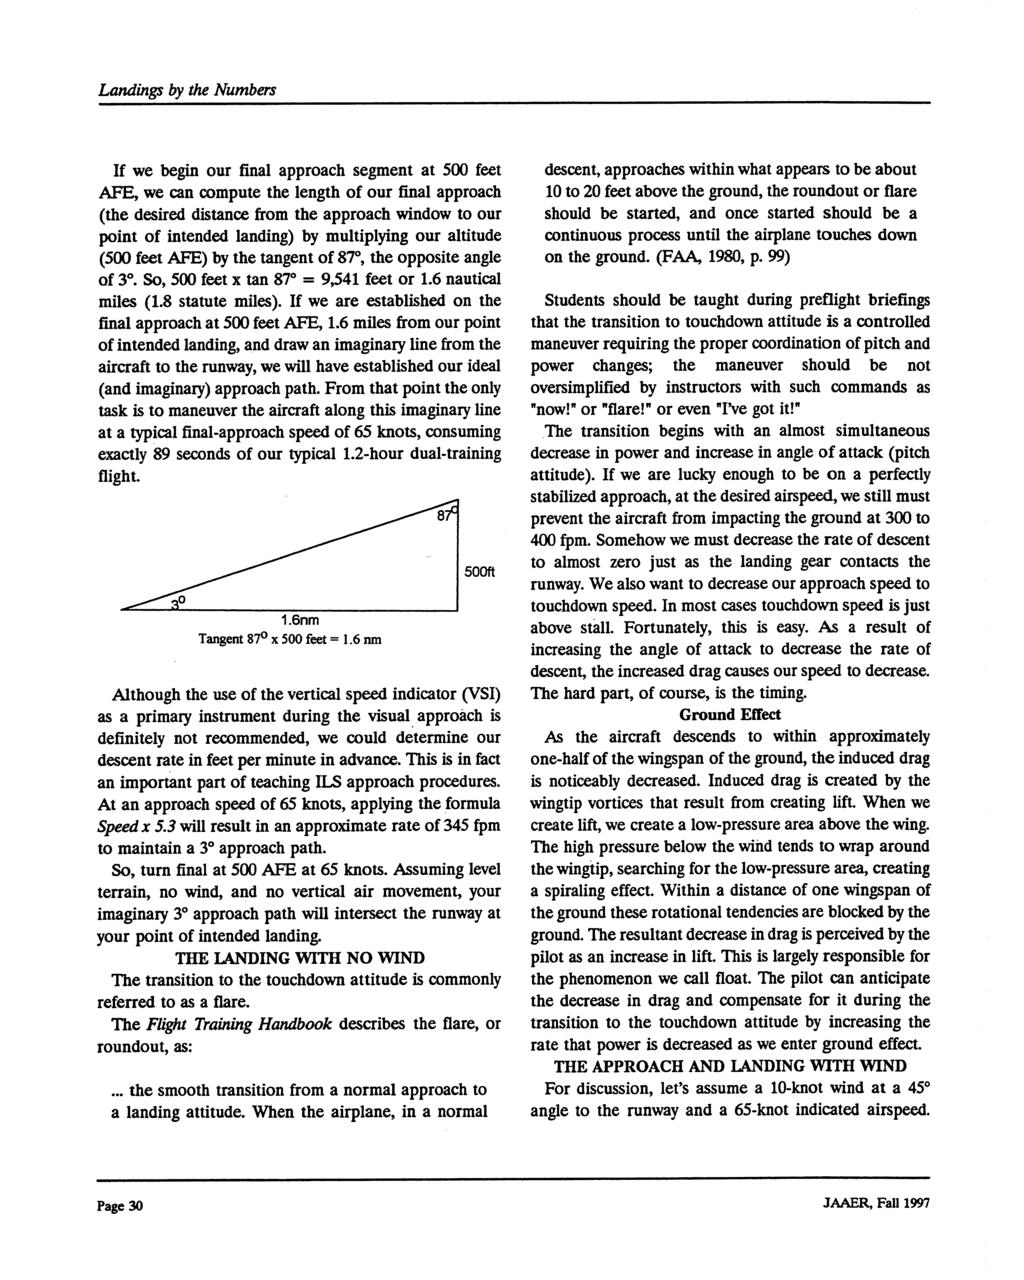 Journal of Aviation/Aerospace Education & Research, Vol. 8, No. 1 [1997], Art.